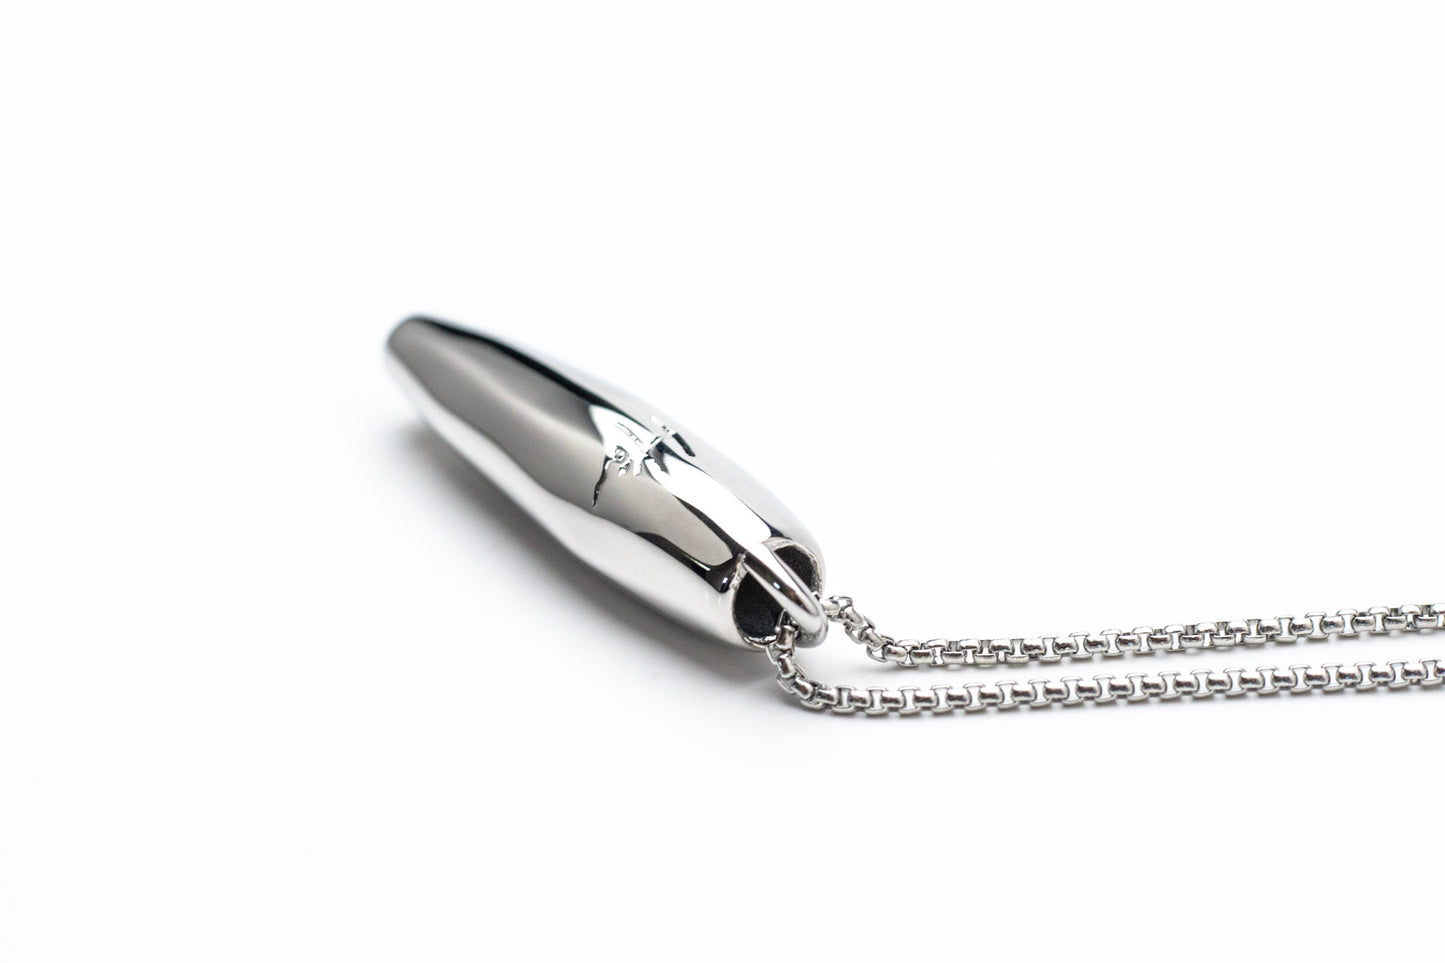 Hā Tool Classic Silver | Anxiety & Stress Relief Necklace